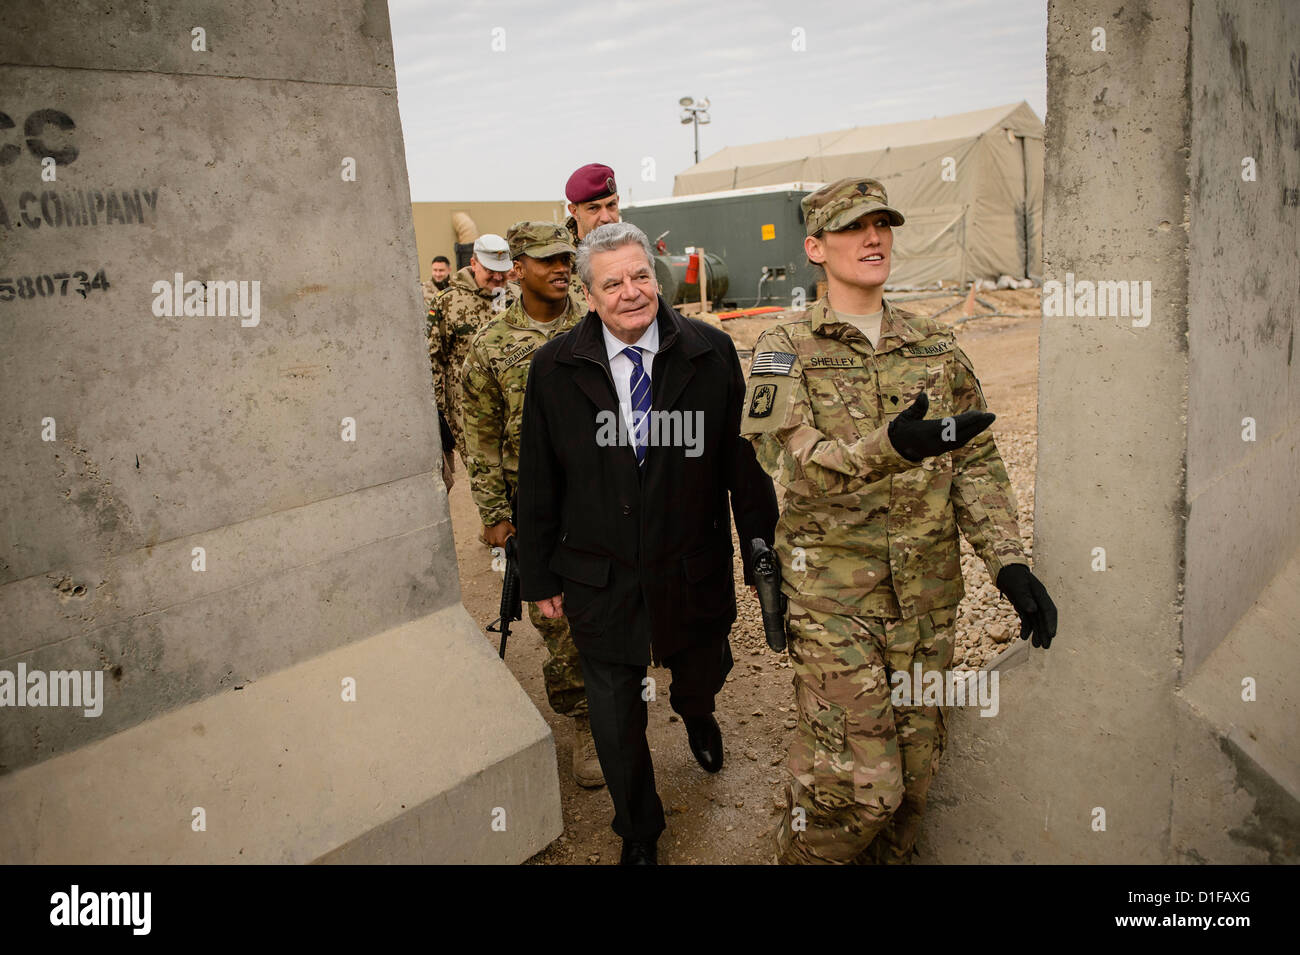 HANDOUT - A handout picture dated 19 December 2012 shows German President Joachim Gauck walking next to Specialist Shelley to has breakfast with US soldiers in Masar-i-Sharif, Afghanistan.. Photo: FEDERAL GOVERNMENT / STEFFEN KUGLER Stock Photo